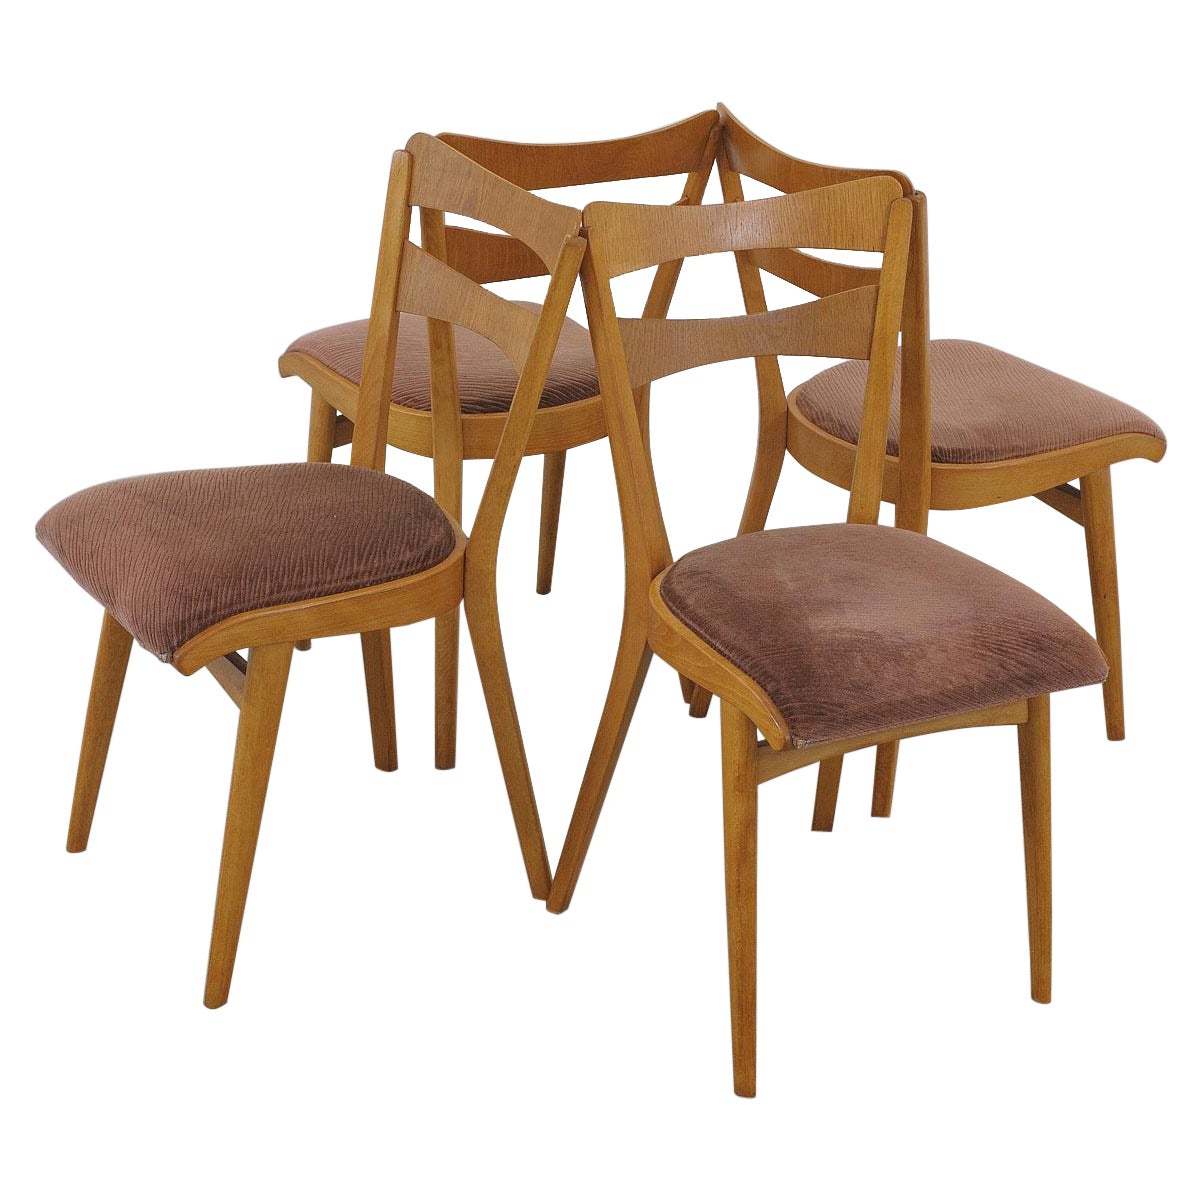 Mid century Dining Chairs by Tatra nabytok, Set of 4 For Sale